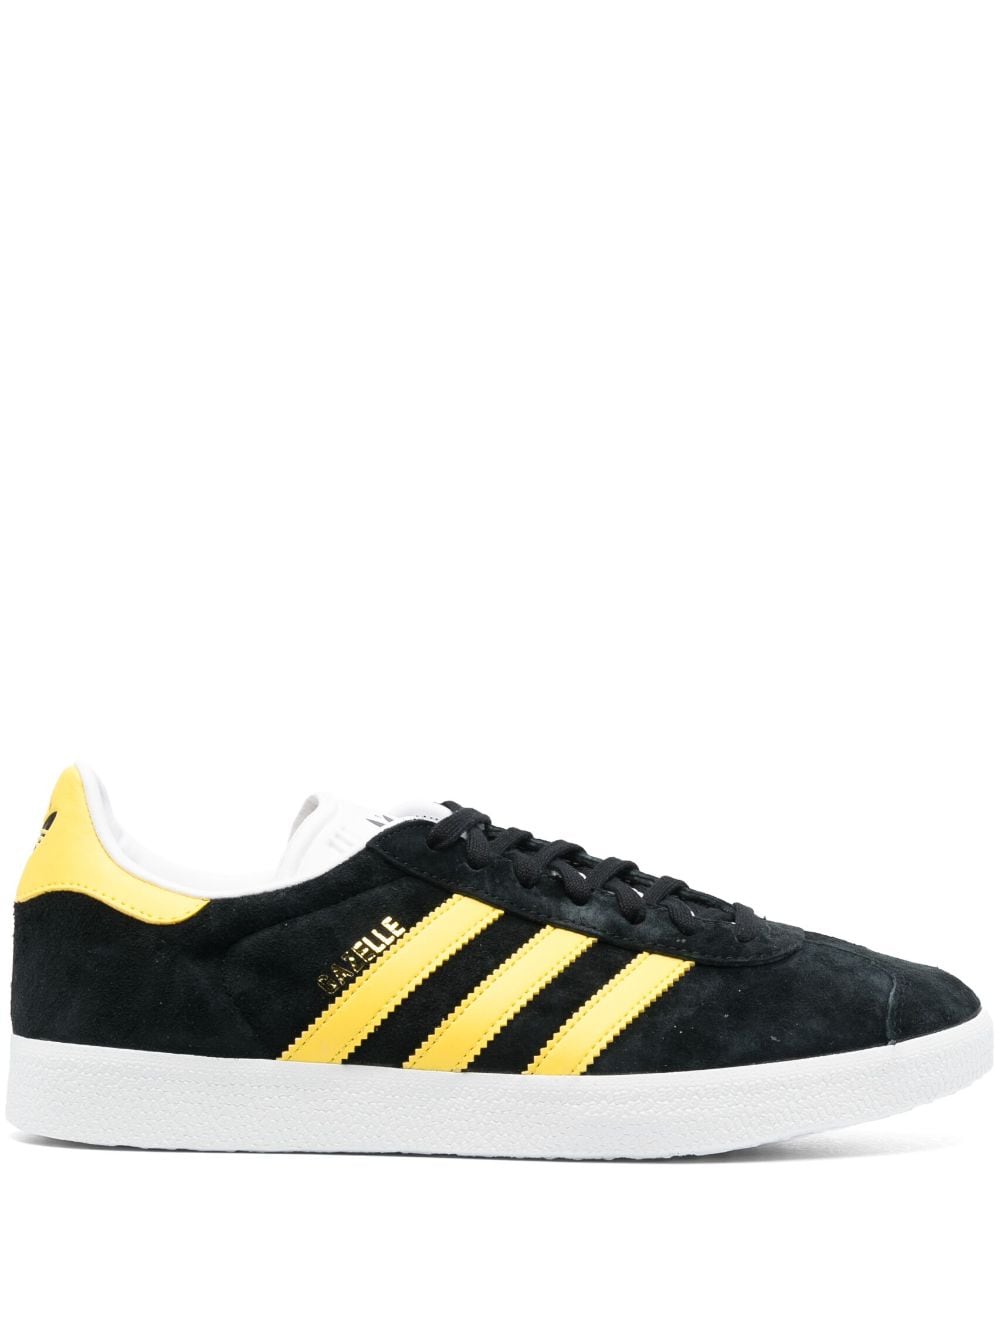 Adidas Originals Gazelle Lace-up Sneakers In Black